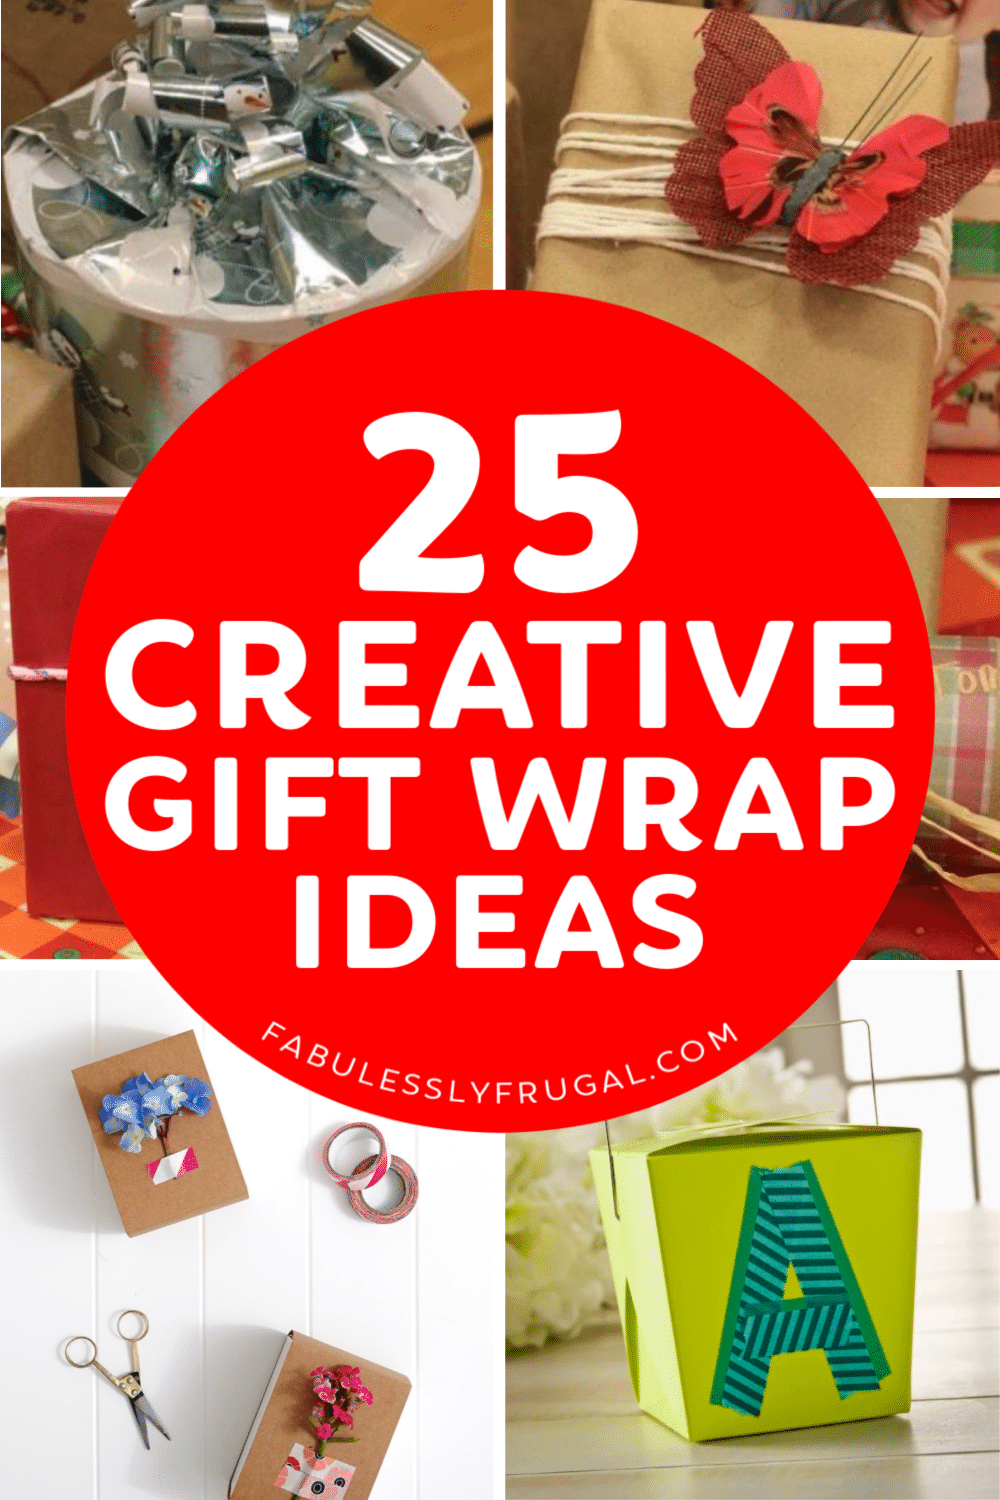 Creative gift wrapping ideas